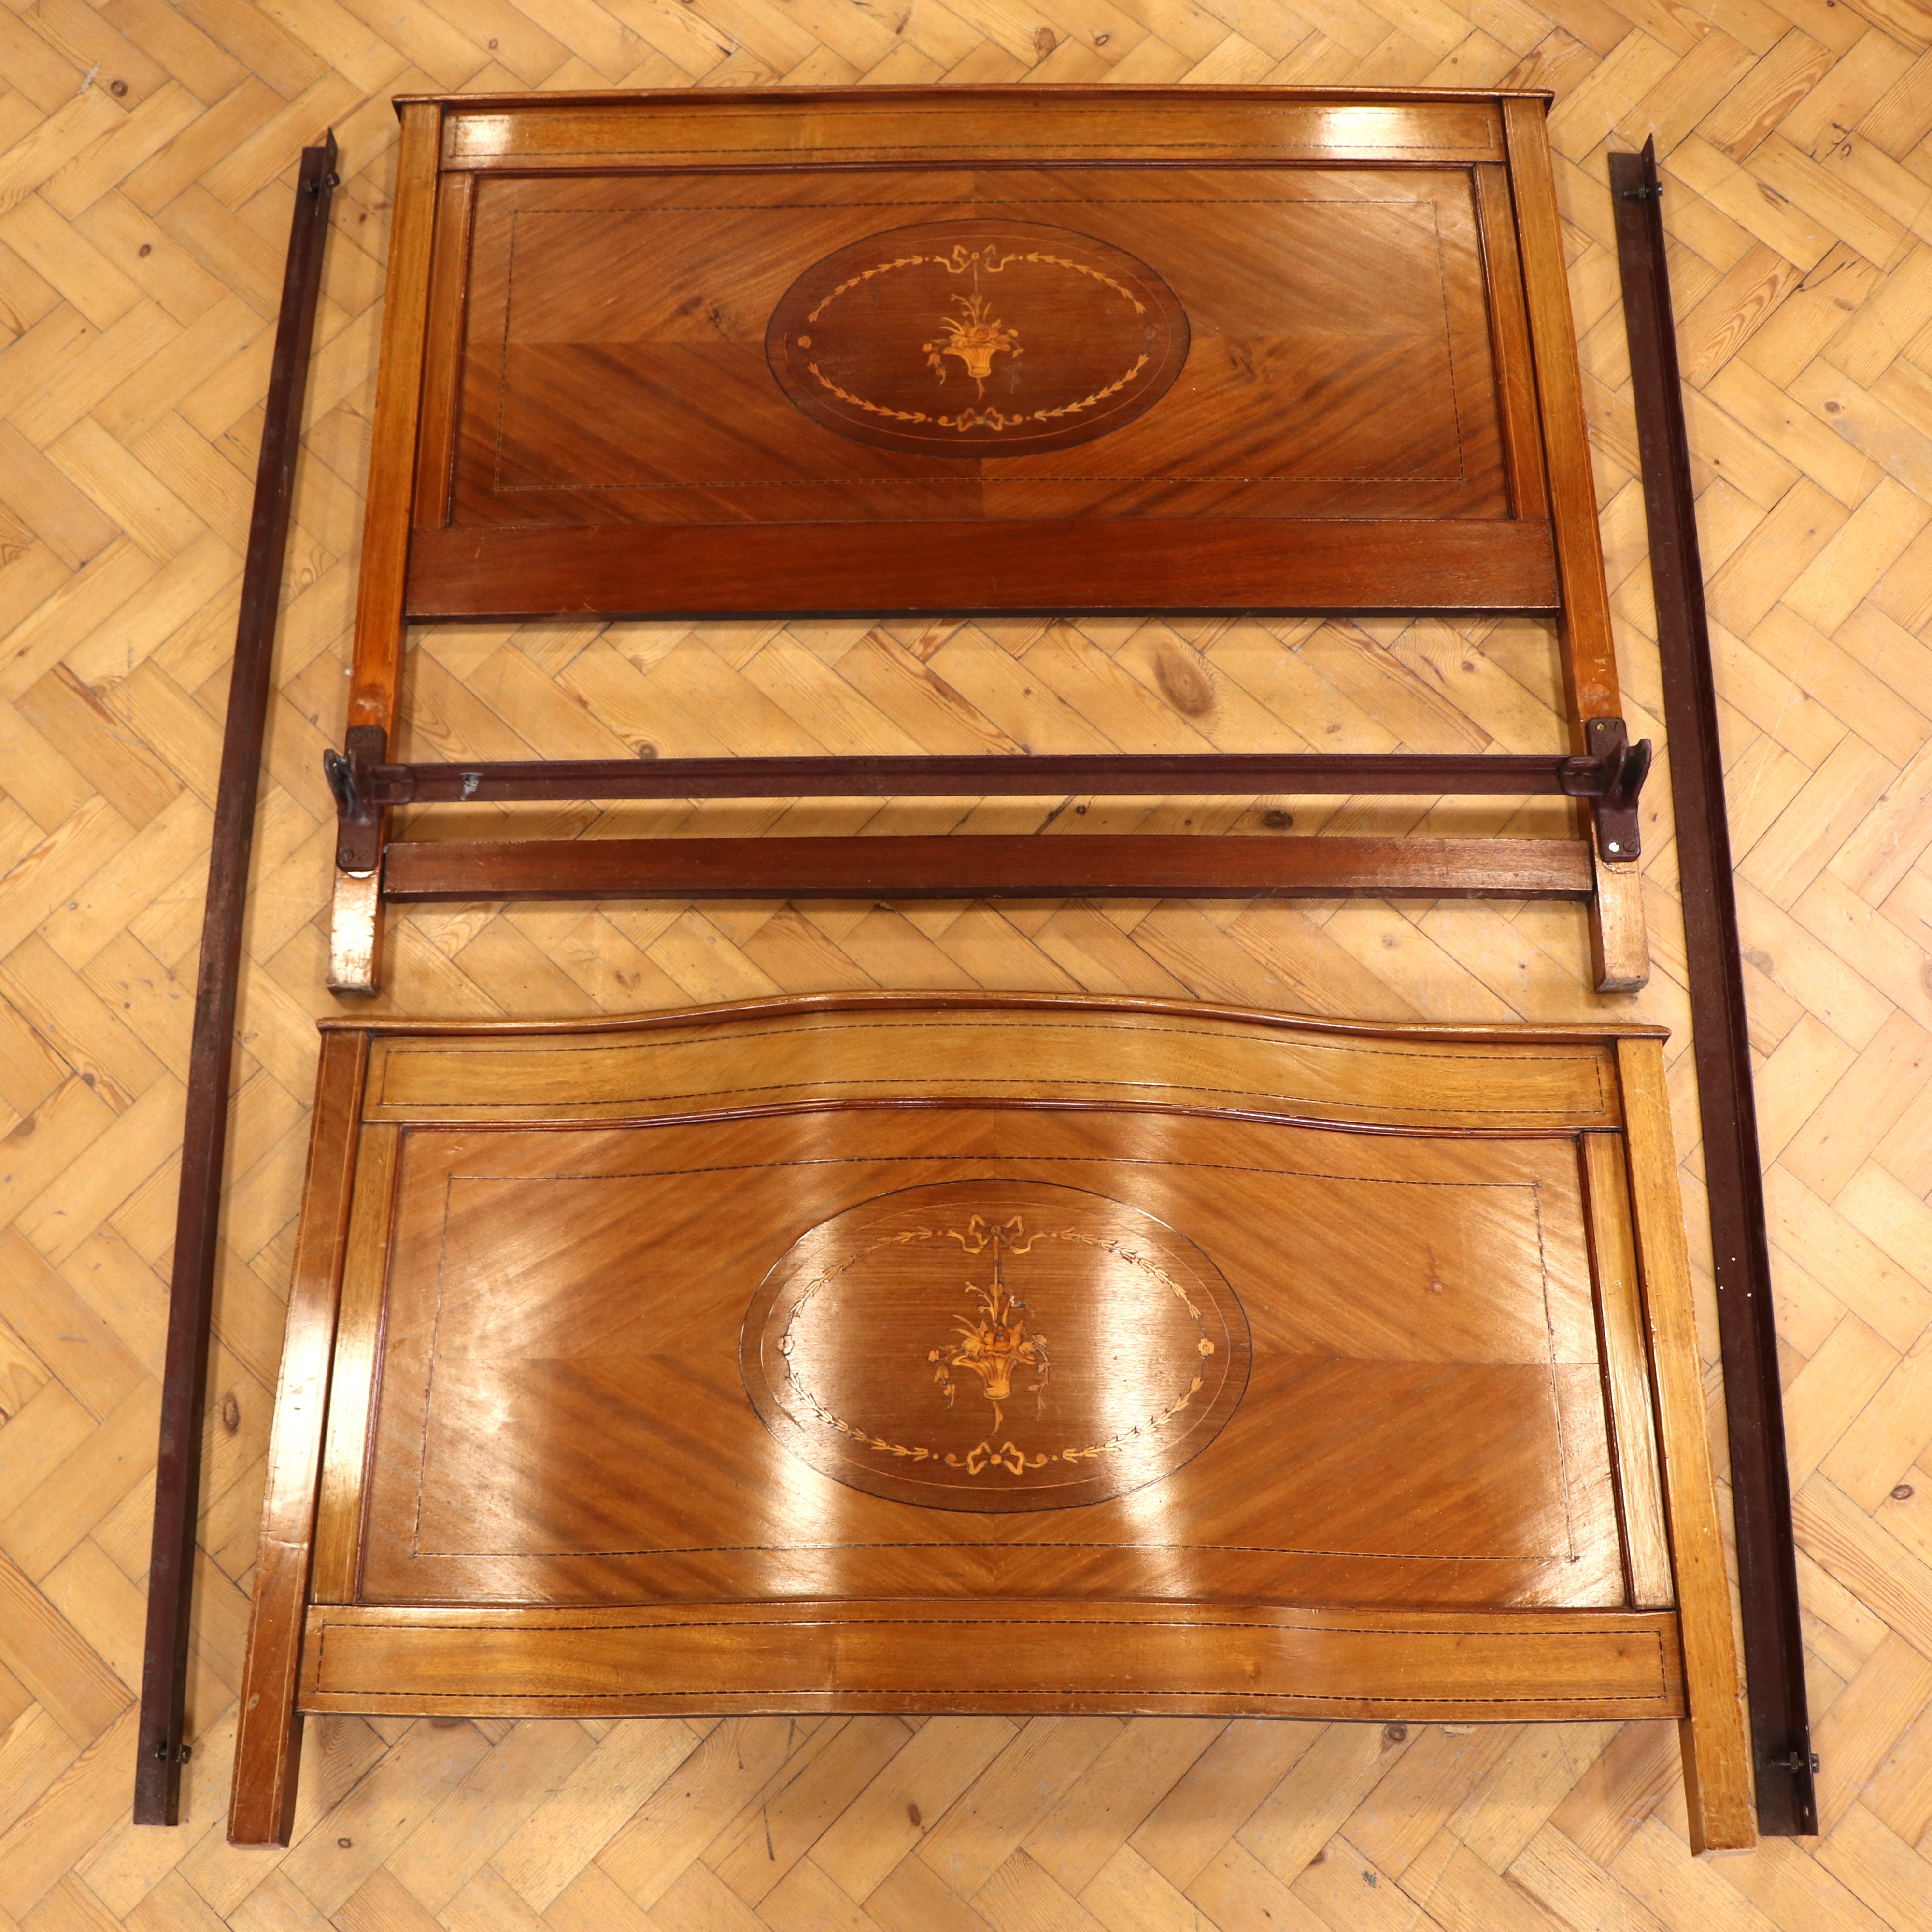 A Sheraton Revival marquetry-inlaid mahogany 4' 6" bedstead, with rails and base, (rails 6' 4"